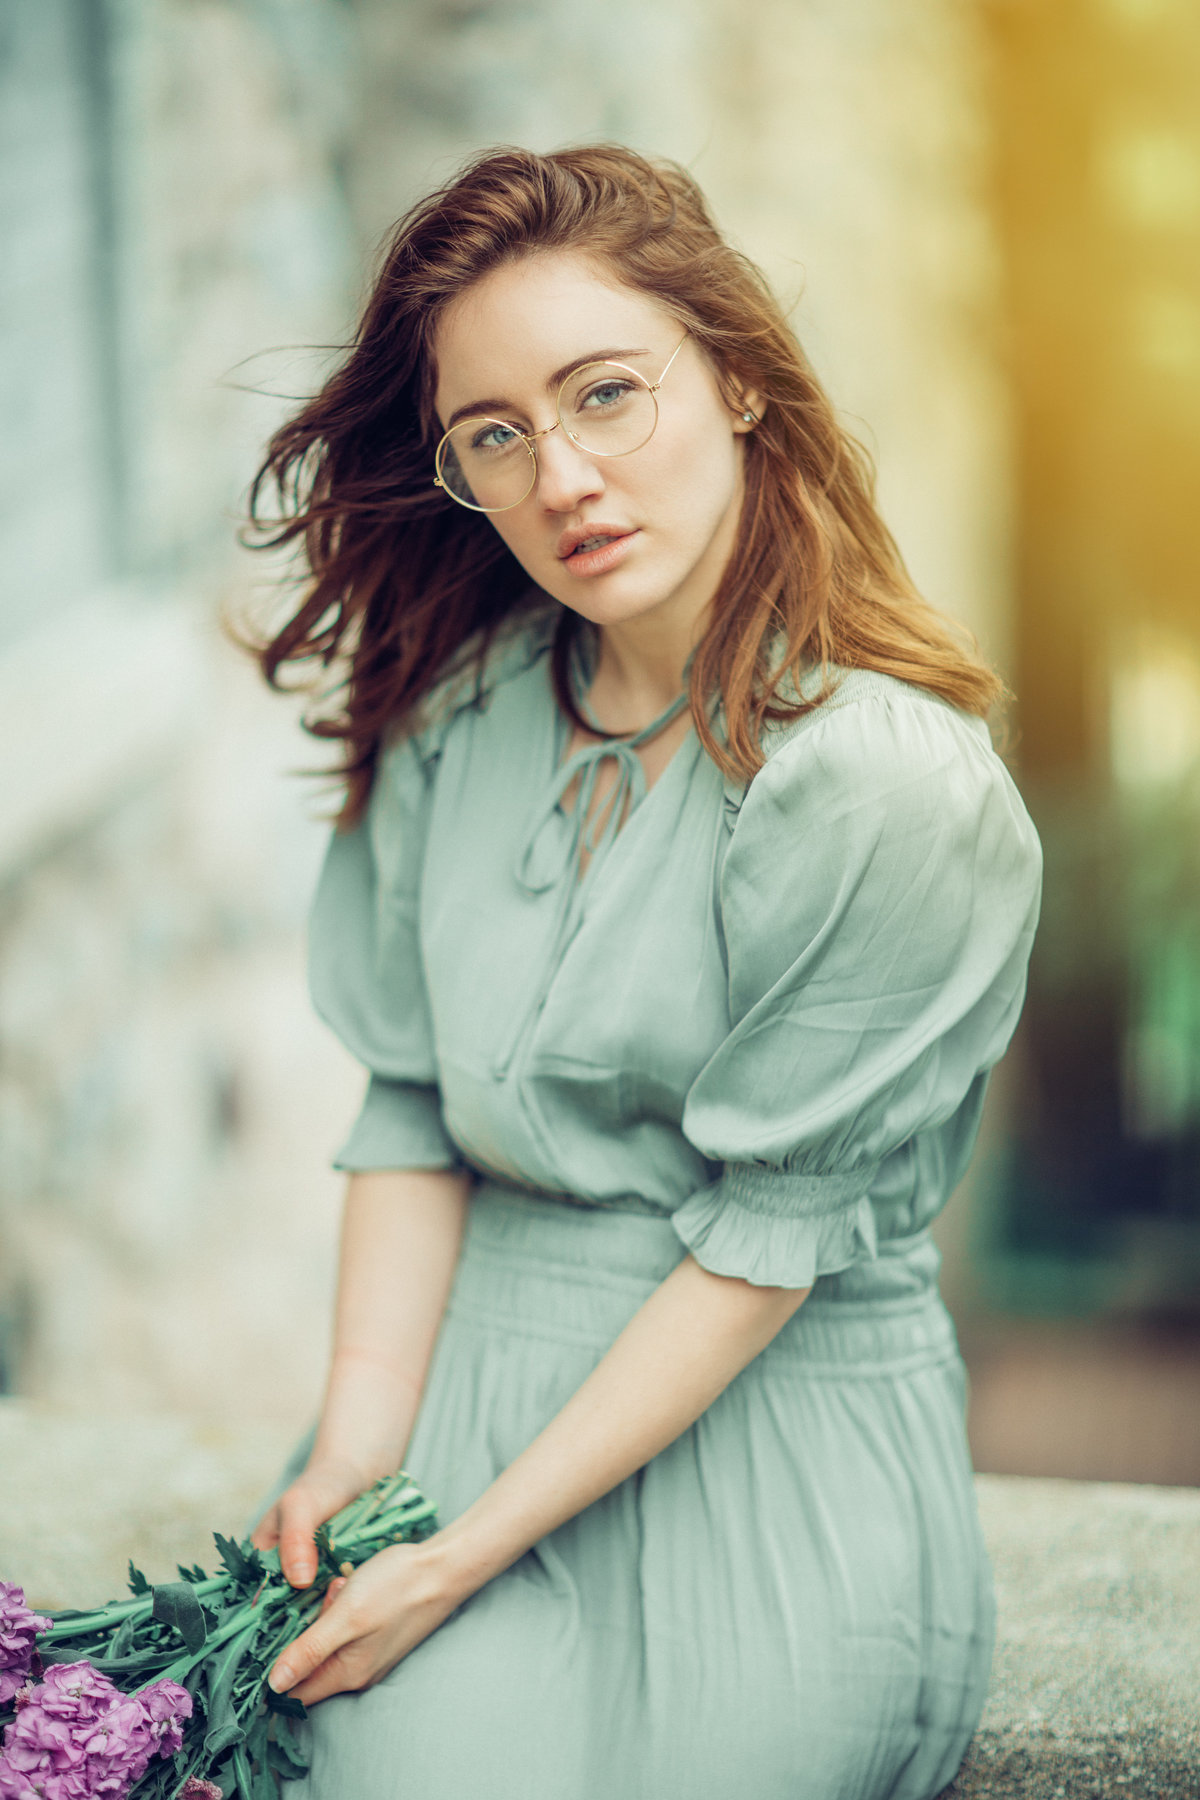 Portrait Photo Of Young Woman In Green Dress Wearing Eye Glasses Los Angeles